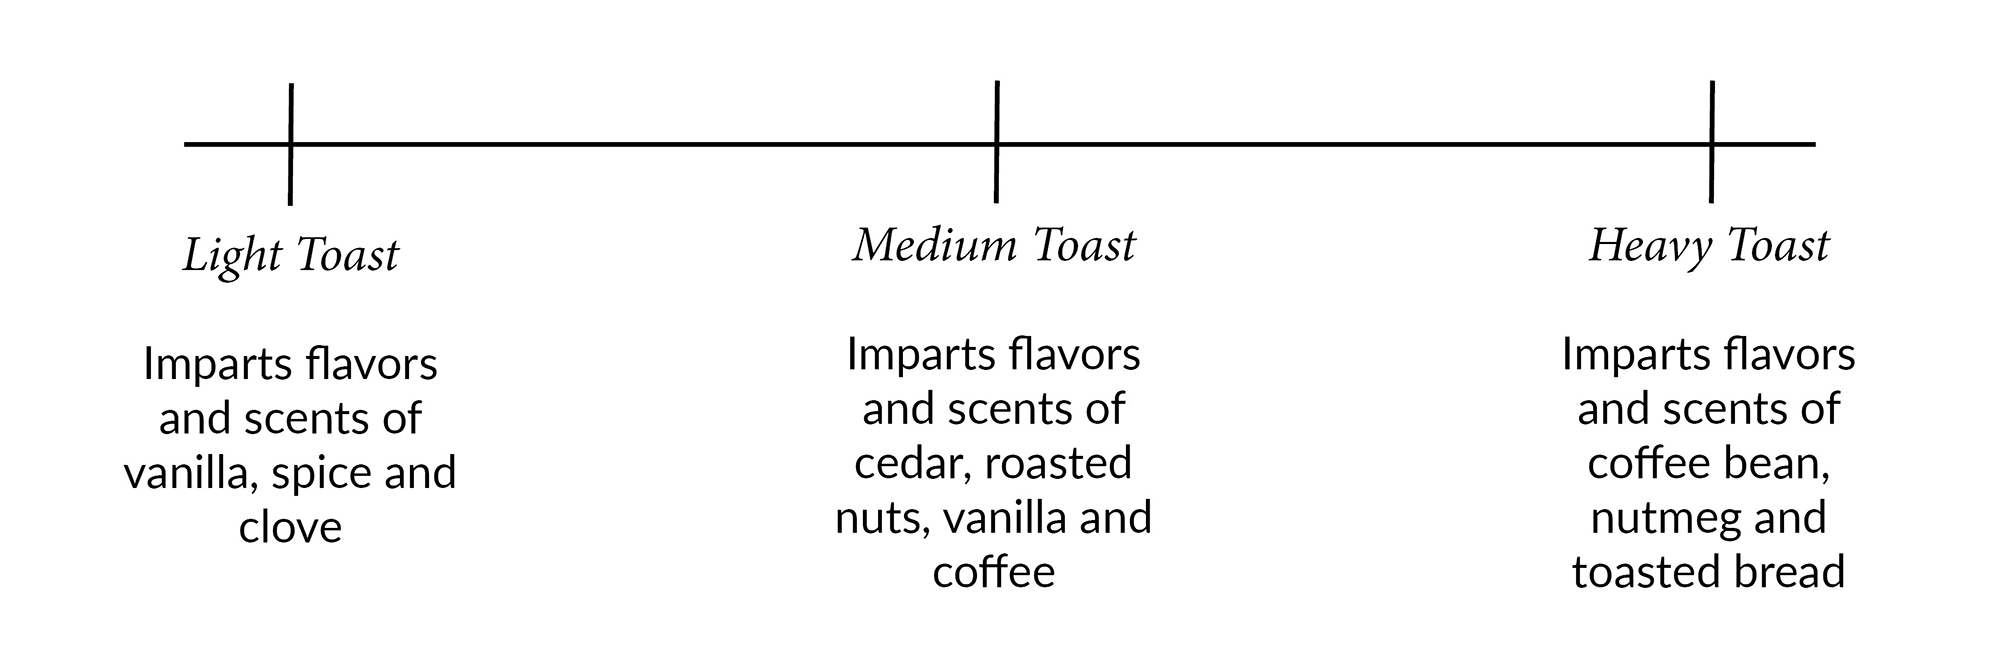 A chart depicting flavors and aromas that come from different toast levels in finished barrels.